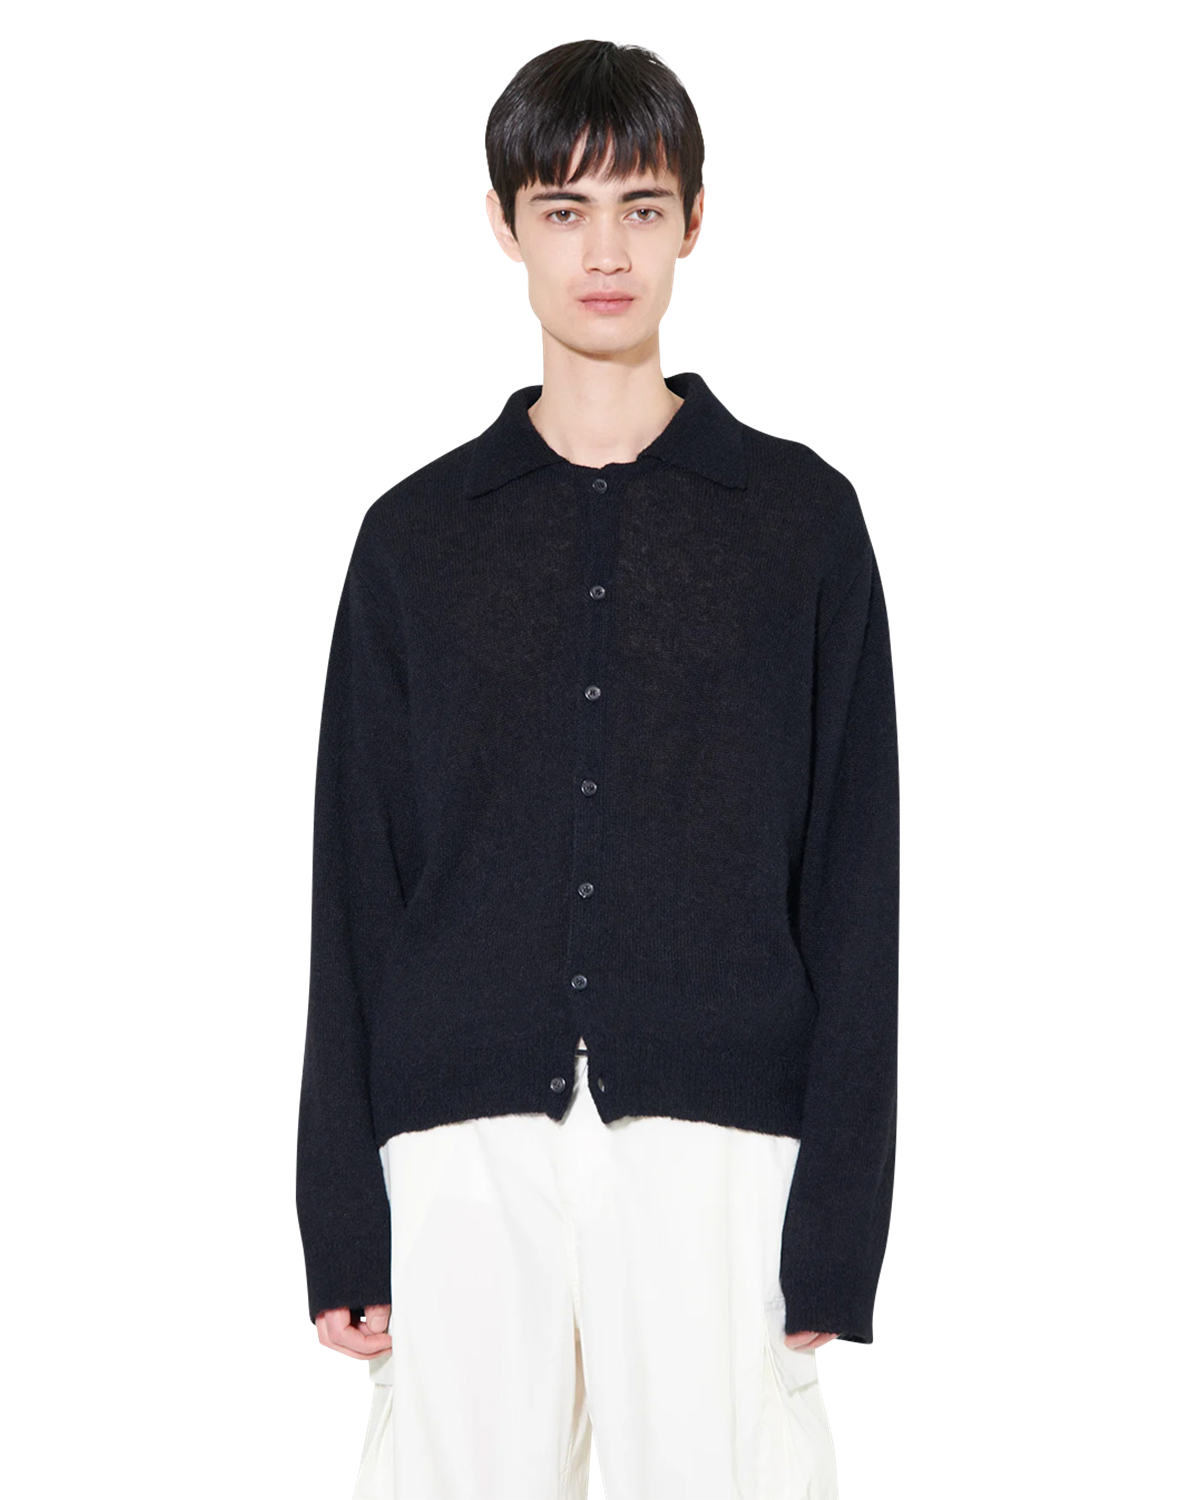 Evening Polo $319 Our Legacy Tops Cardigans Black